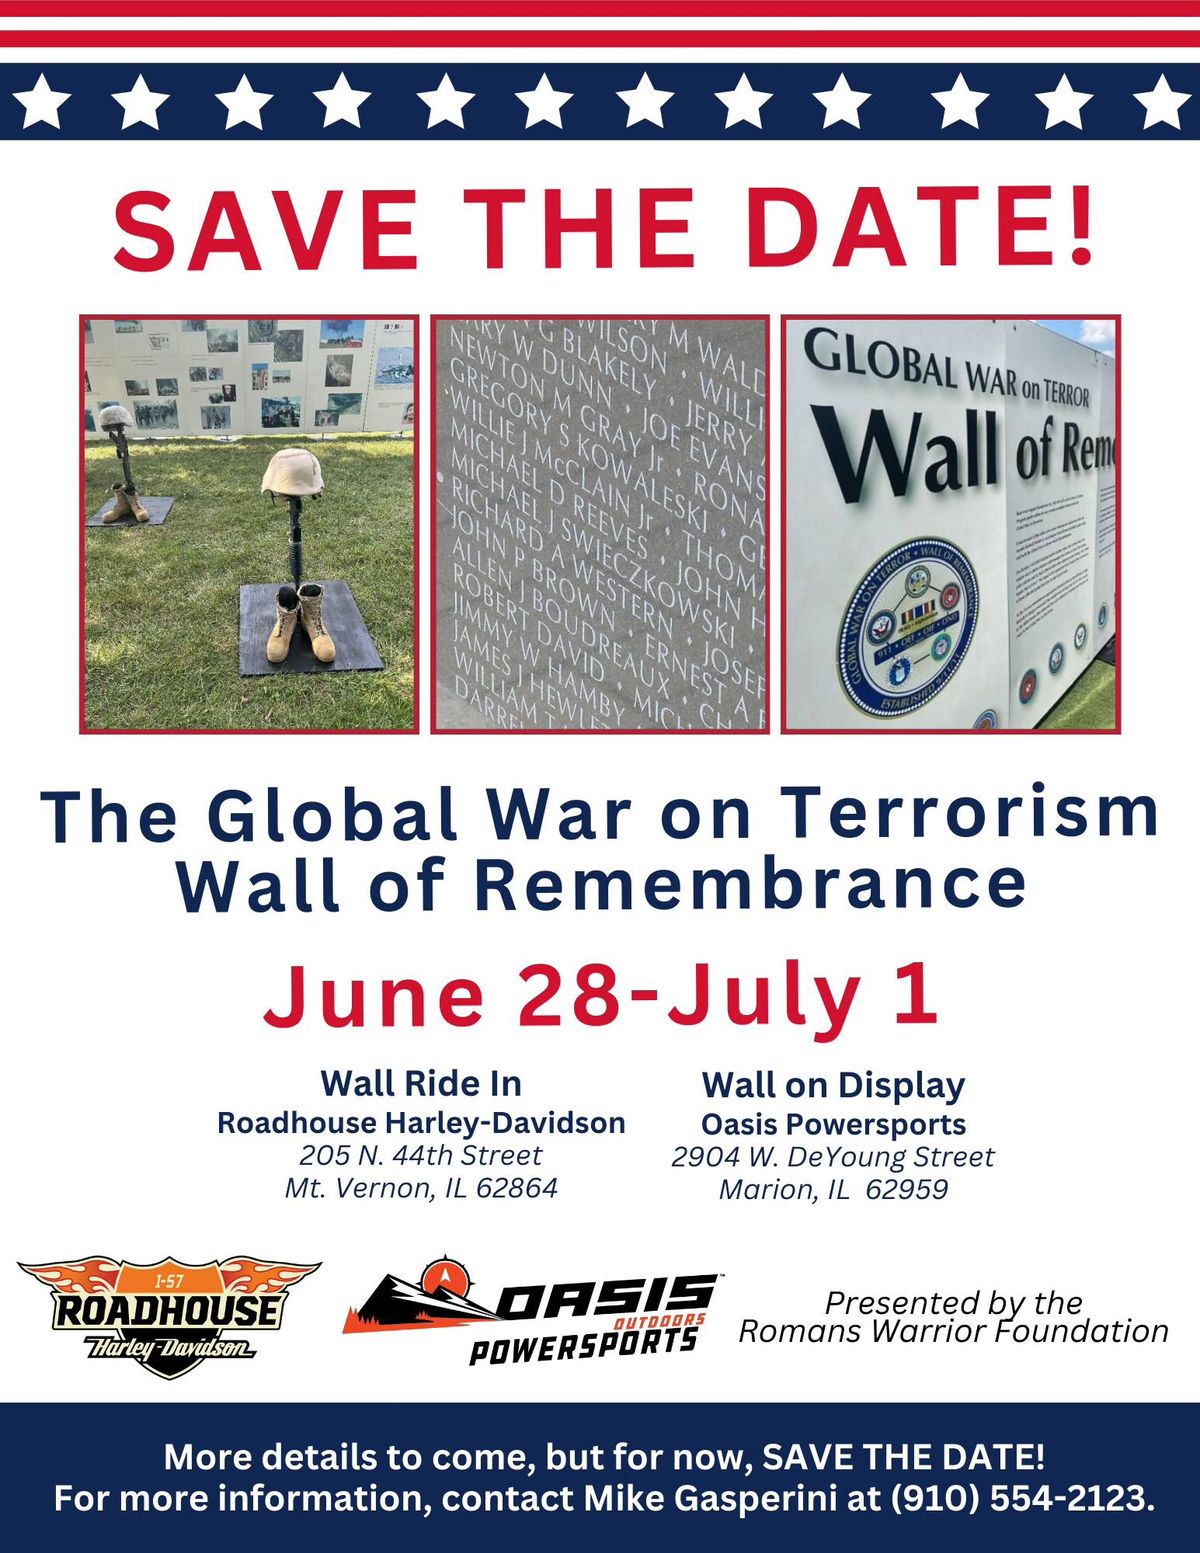 The Global War on Terrorism Wall of Remembrance 